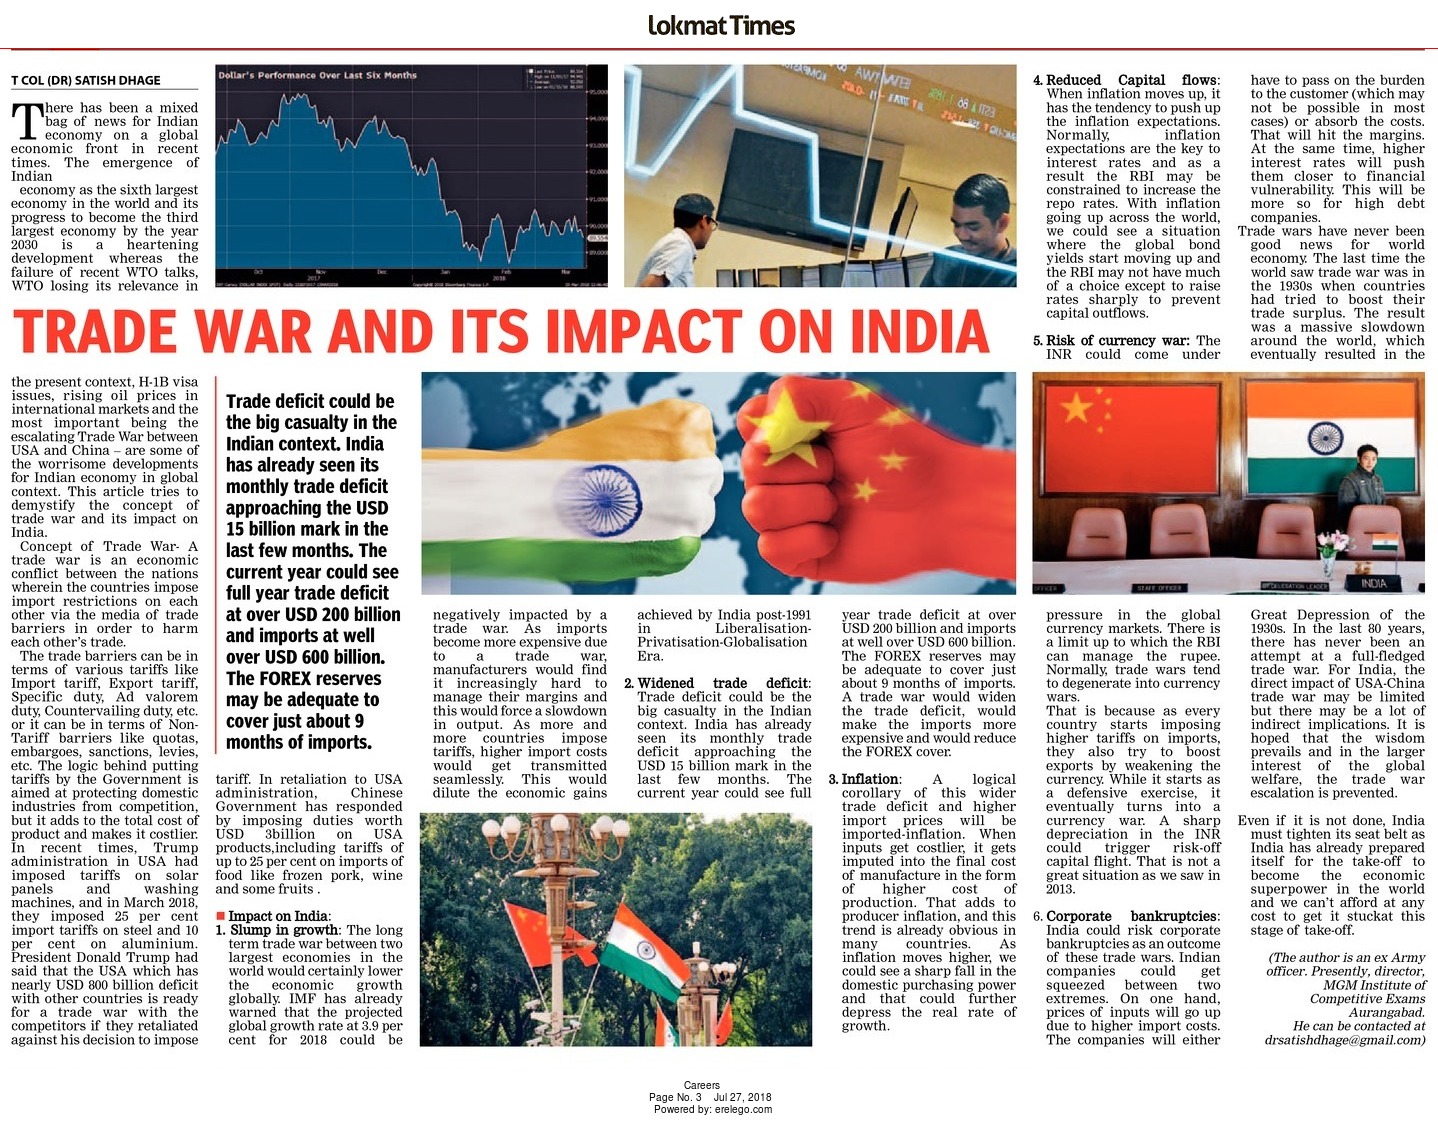 trade-war-its-impact-on-india